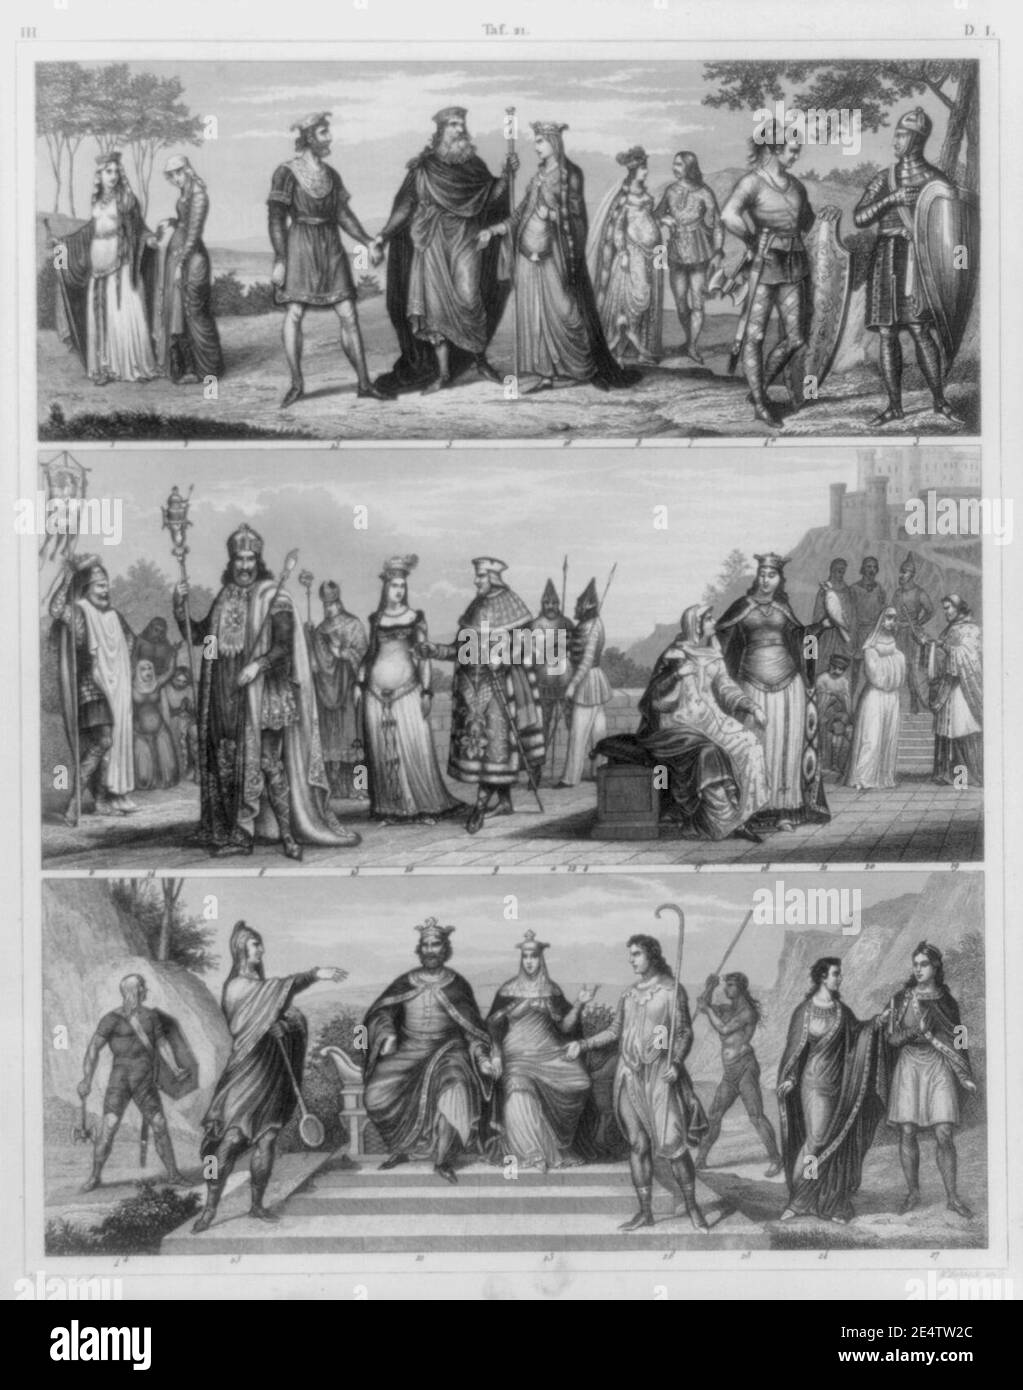 Medieval costumes of Central Europe- fig. 1 Queen Clotilda; fig. 2 Maid of honor; fig. 3 Frankish leader; fig. 4 Frankish warriors; fig. 5 King Clovis; fig. 6, Charlemagne; fig. 7, 8 Prince Stock Photo